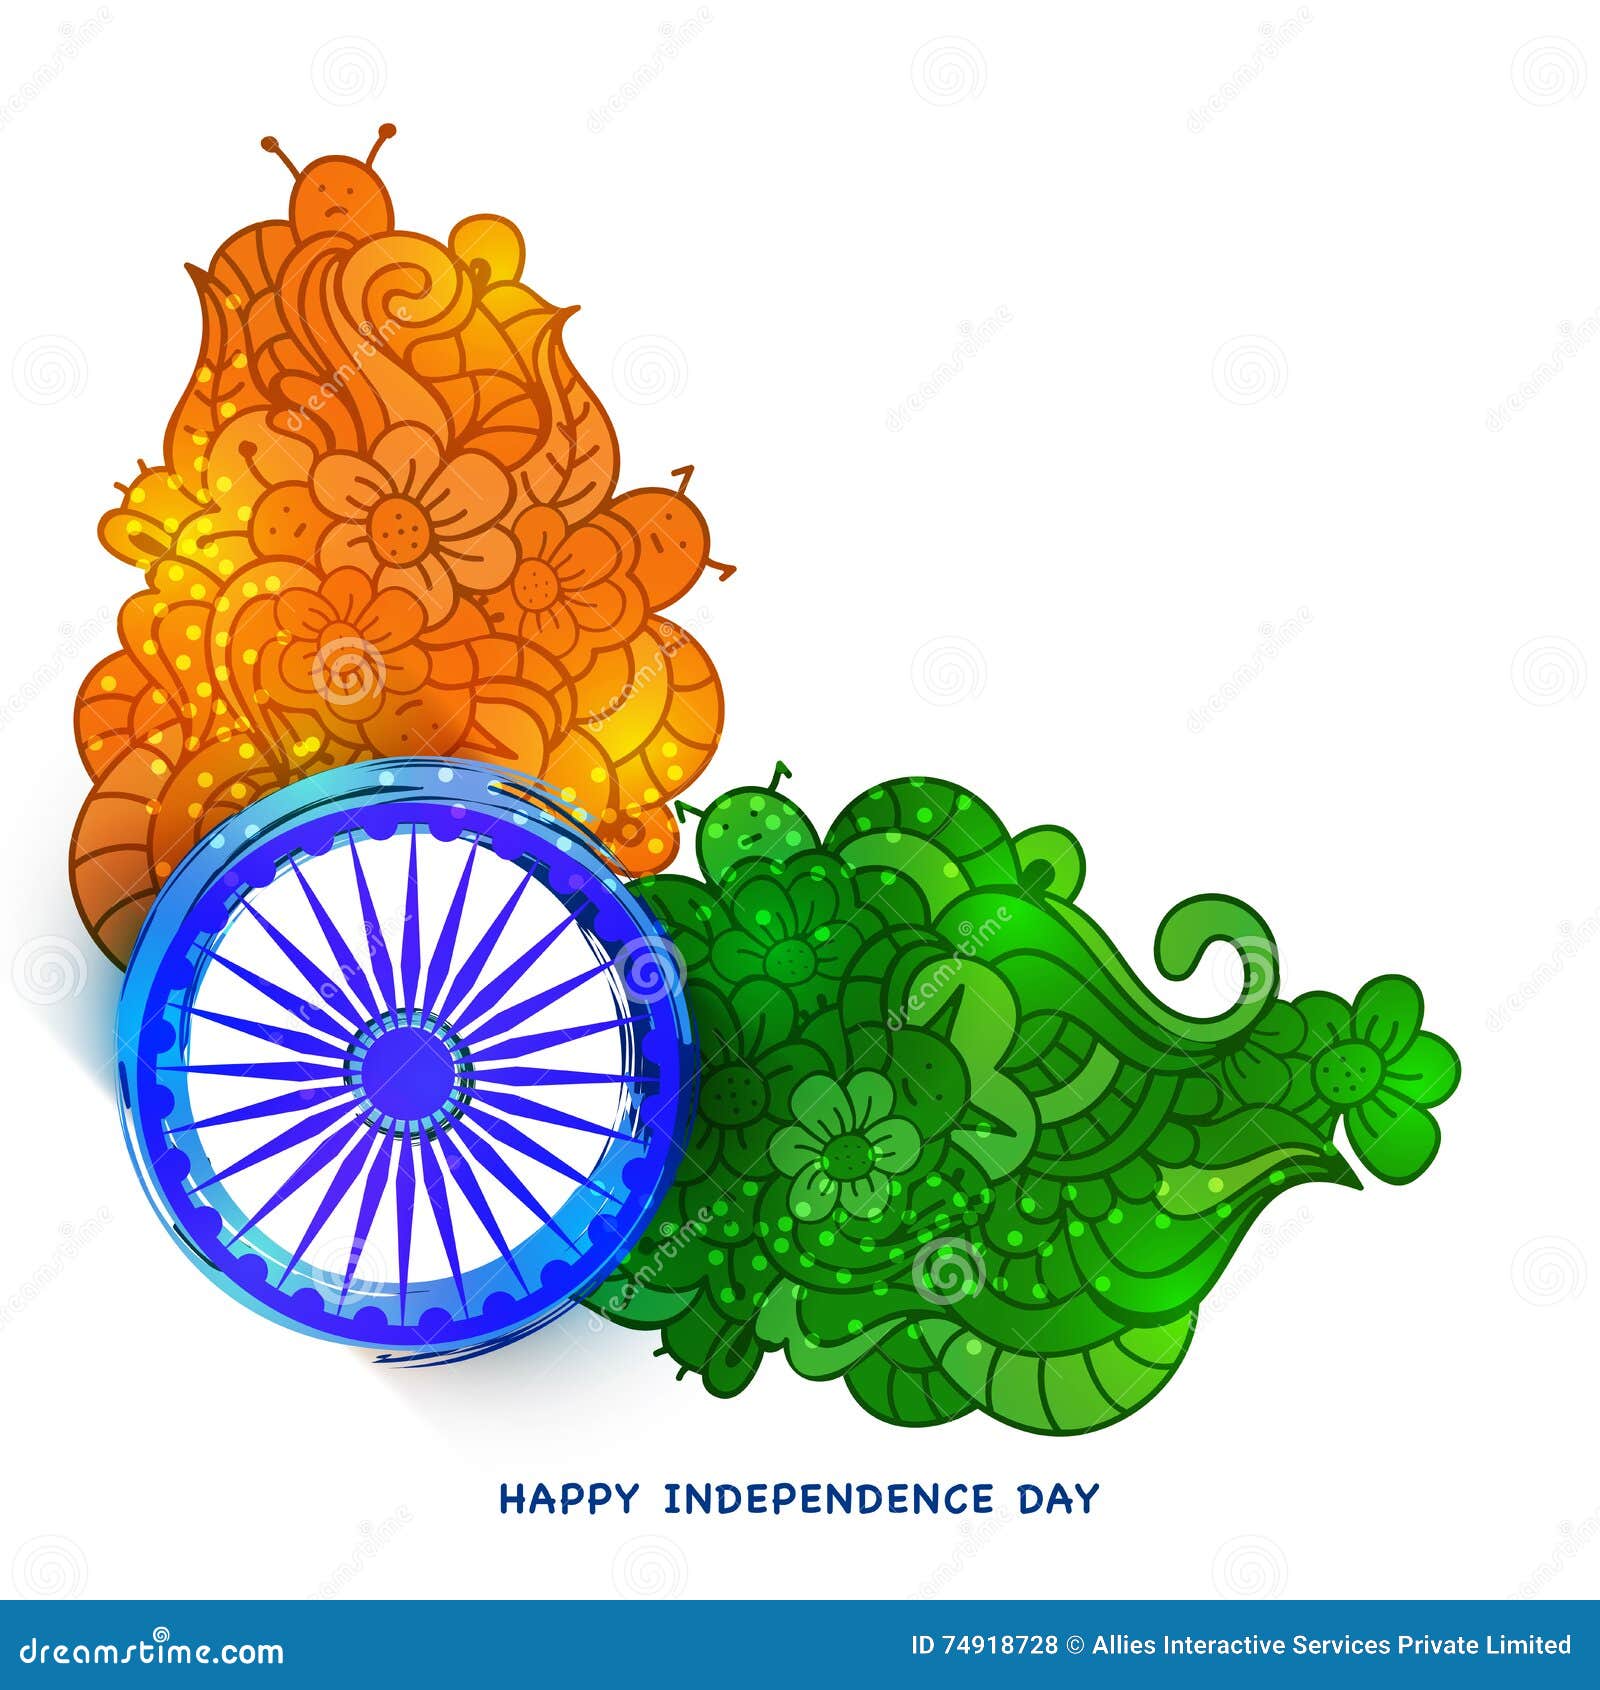 Greeting Card for Indian Independence Day. Stock Illustration ...